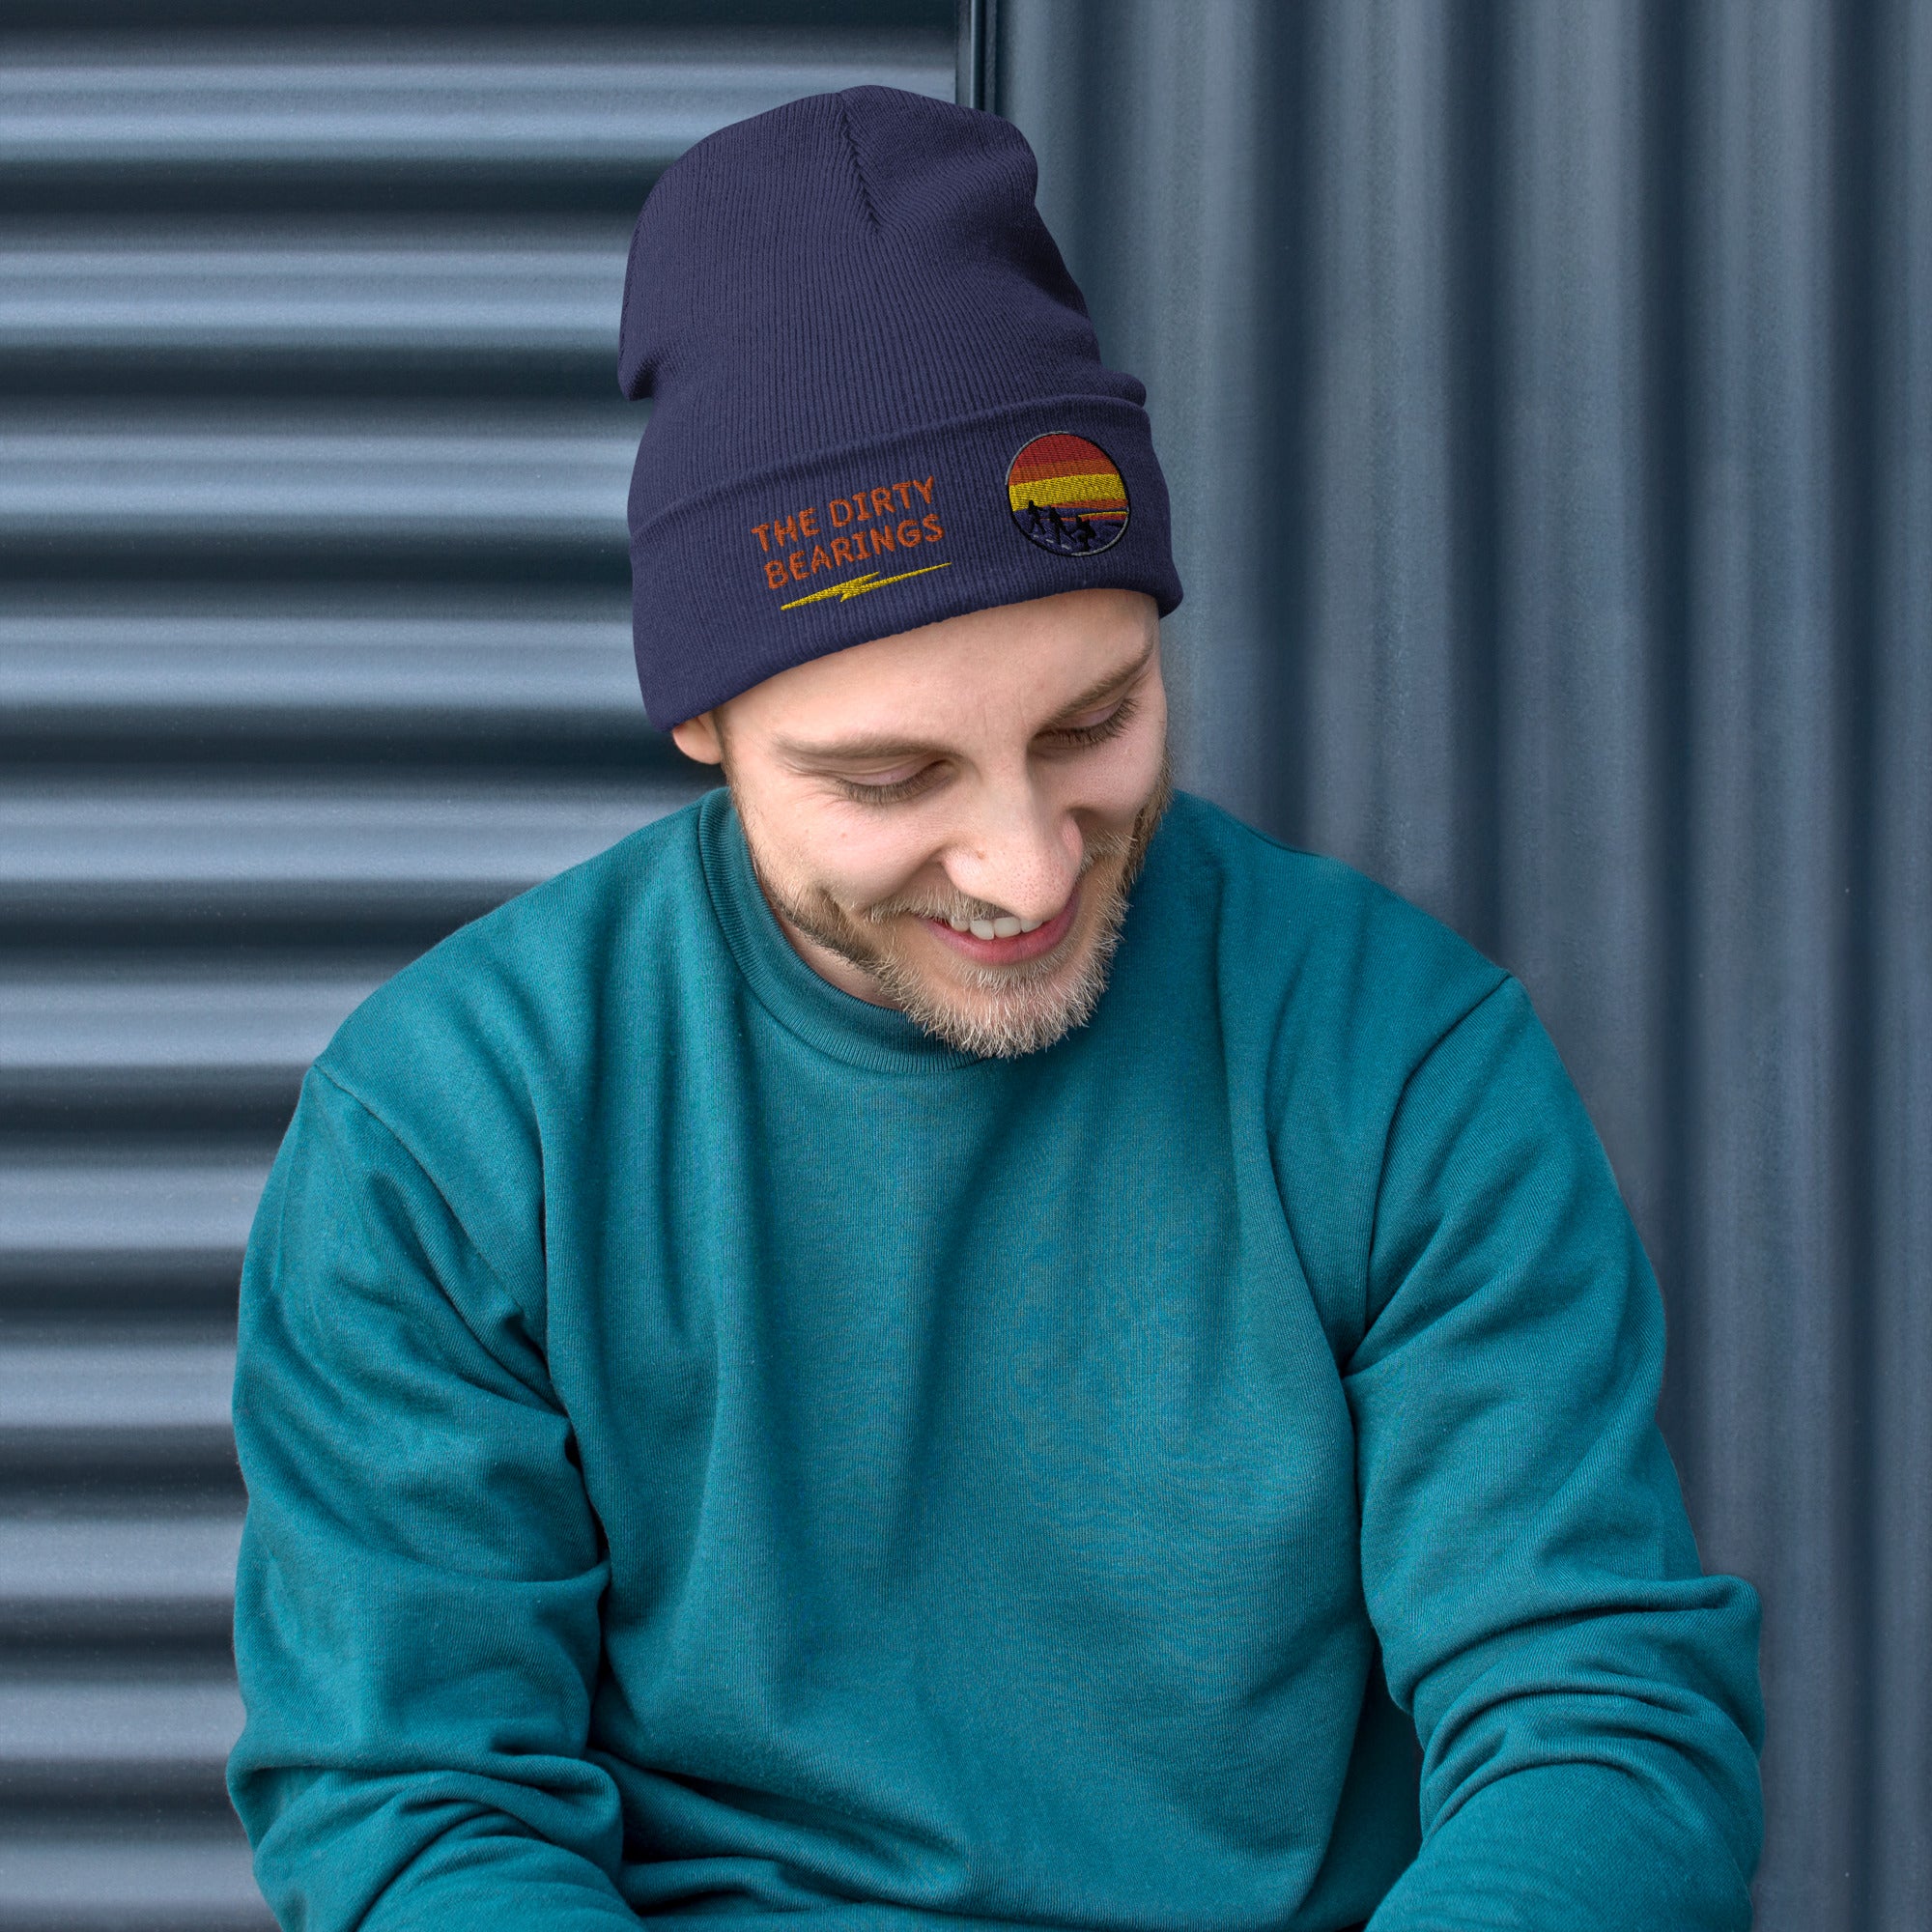 The Dirty Bearings Embroidered Beanie